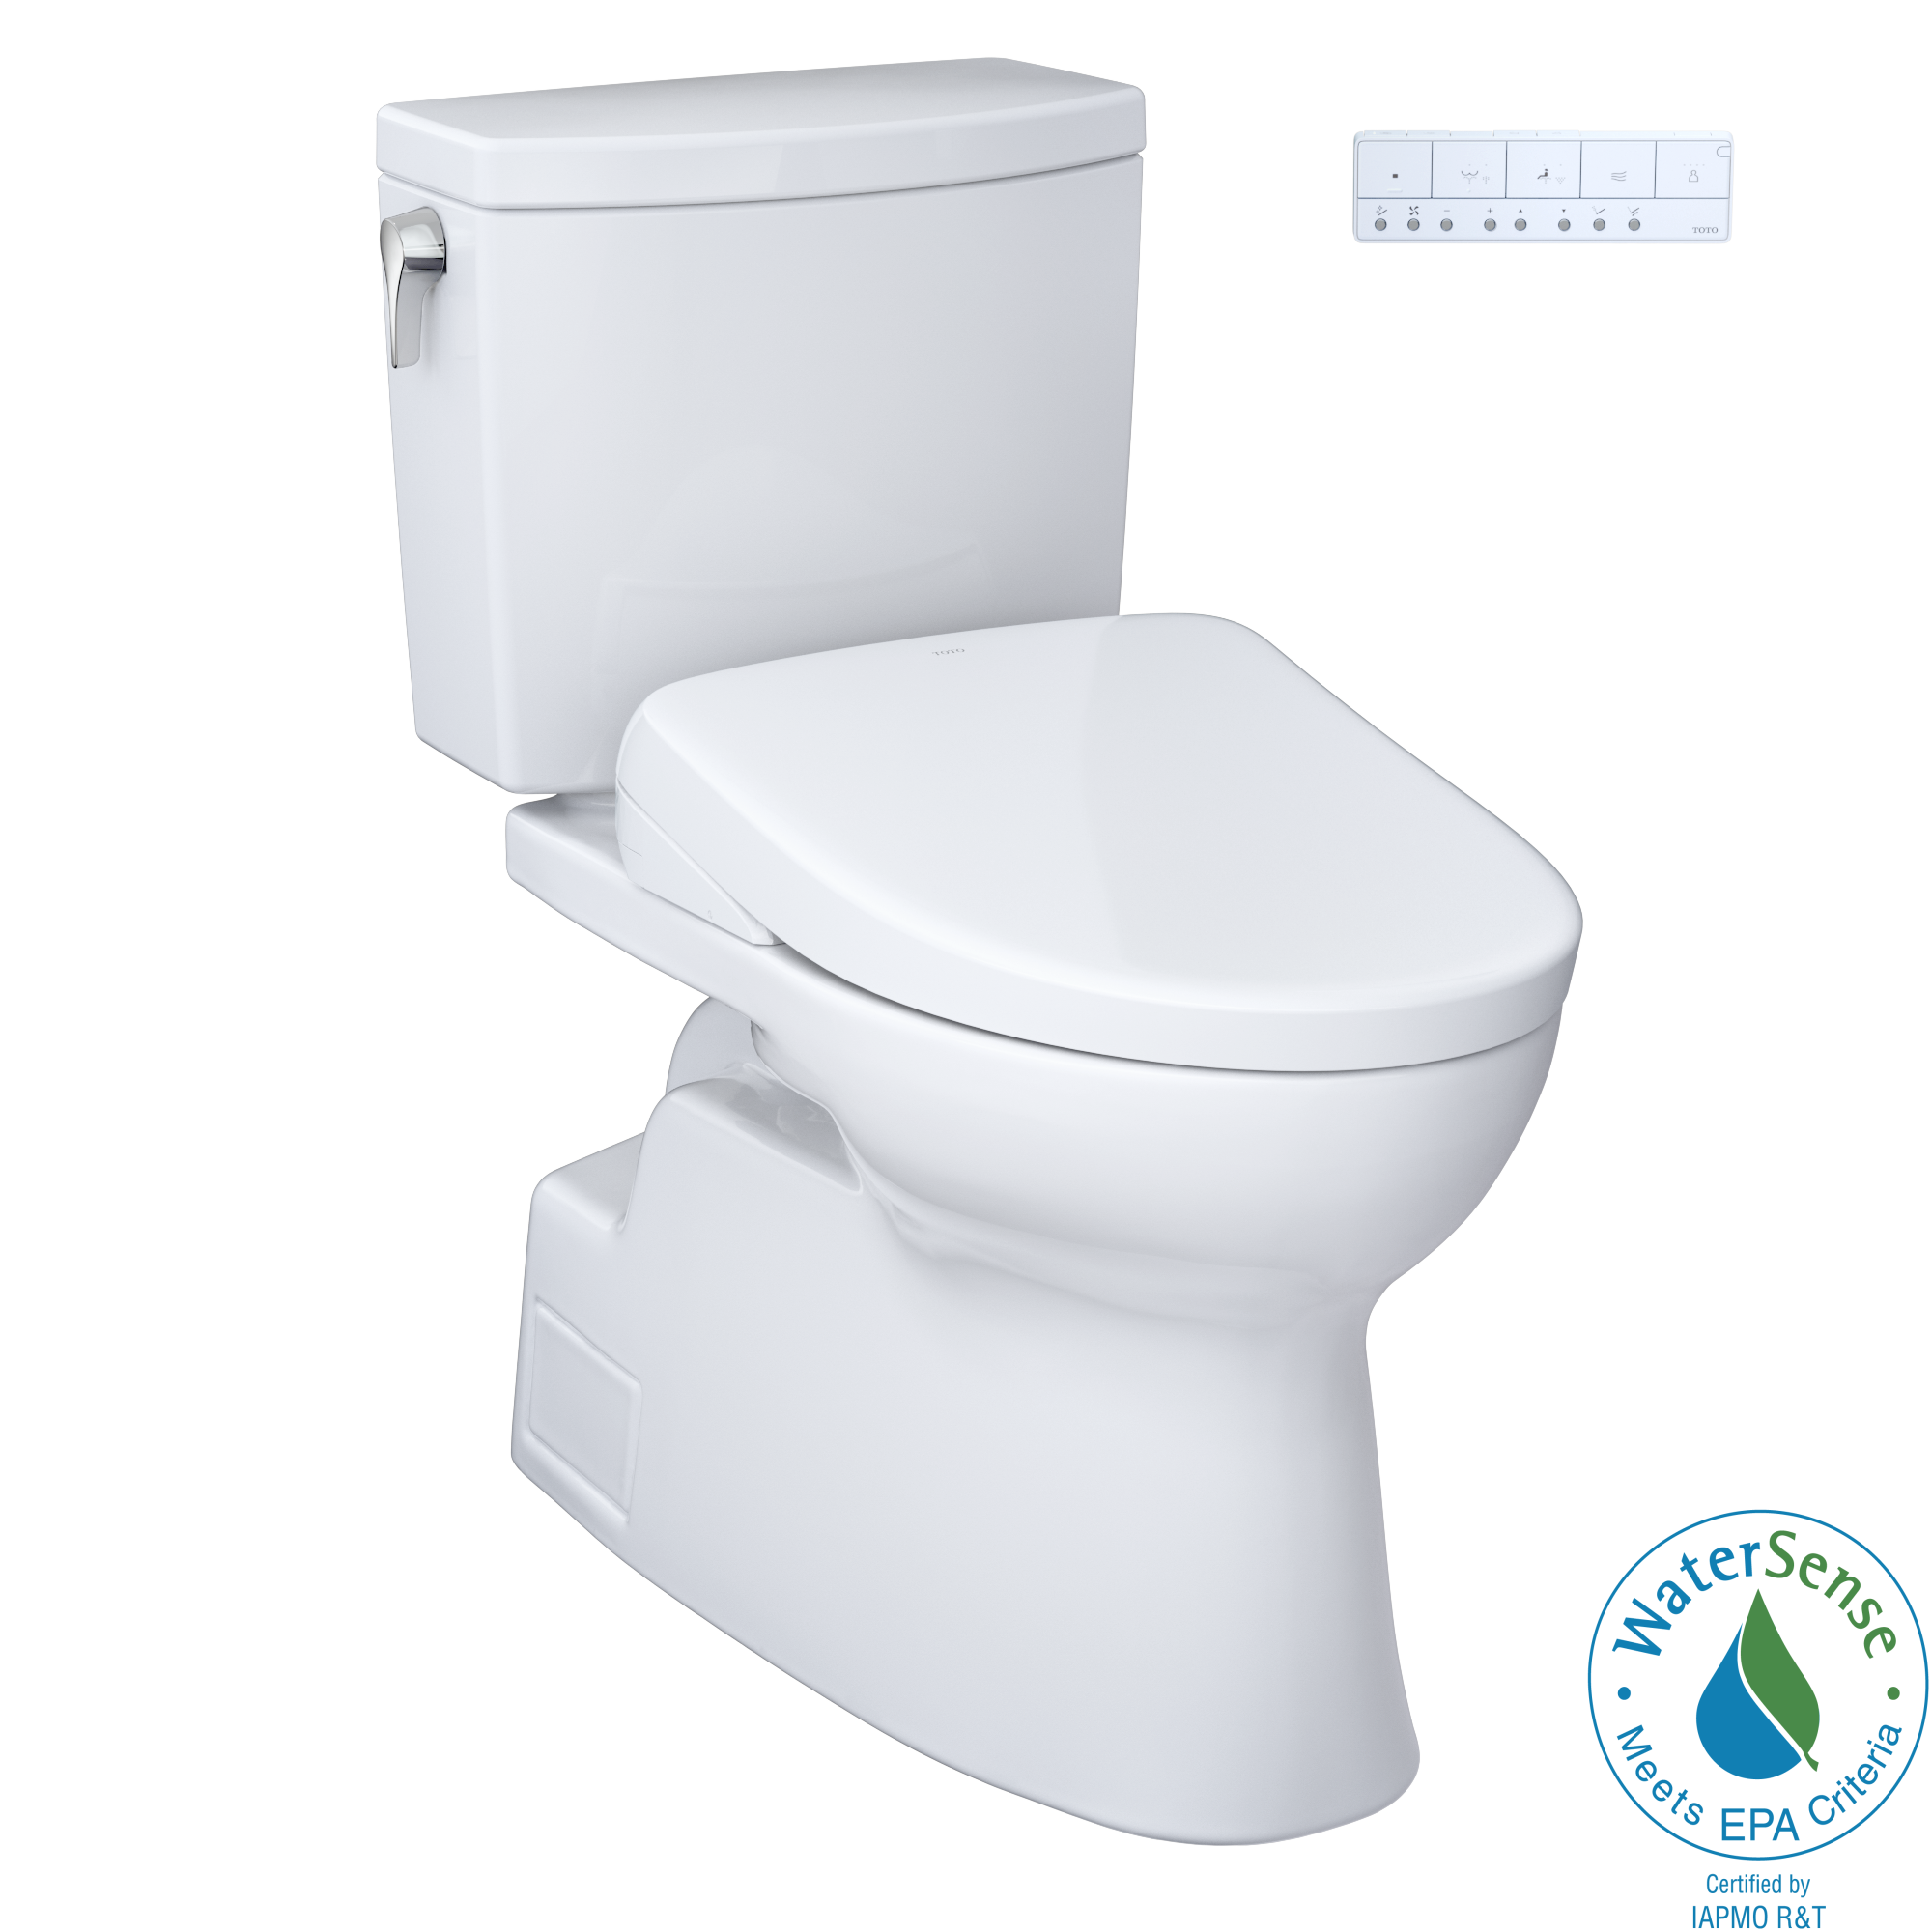 TOTO WASHLET+ Vespin II 1G Two-Piece Elongated 1.0 GPF Toilet and WASHLET+ S7 Contemporary Bidet Seat, Cotton White - MW4744726CUFG#01, MW4744726CUFGA#01